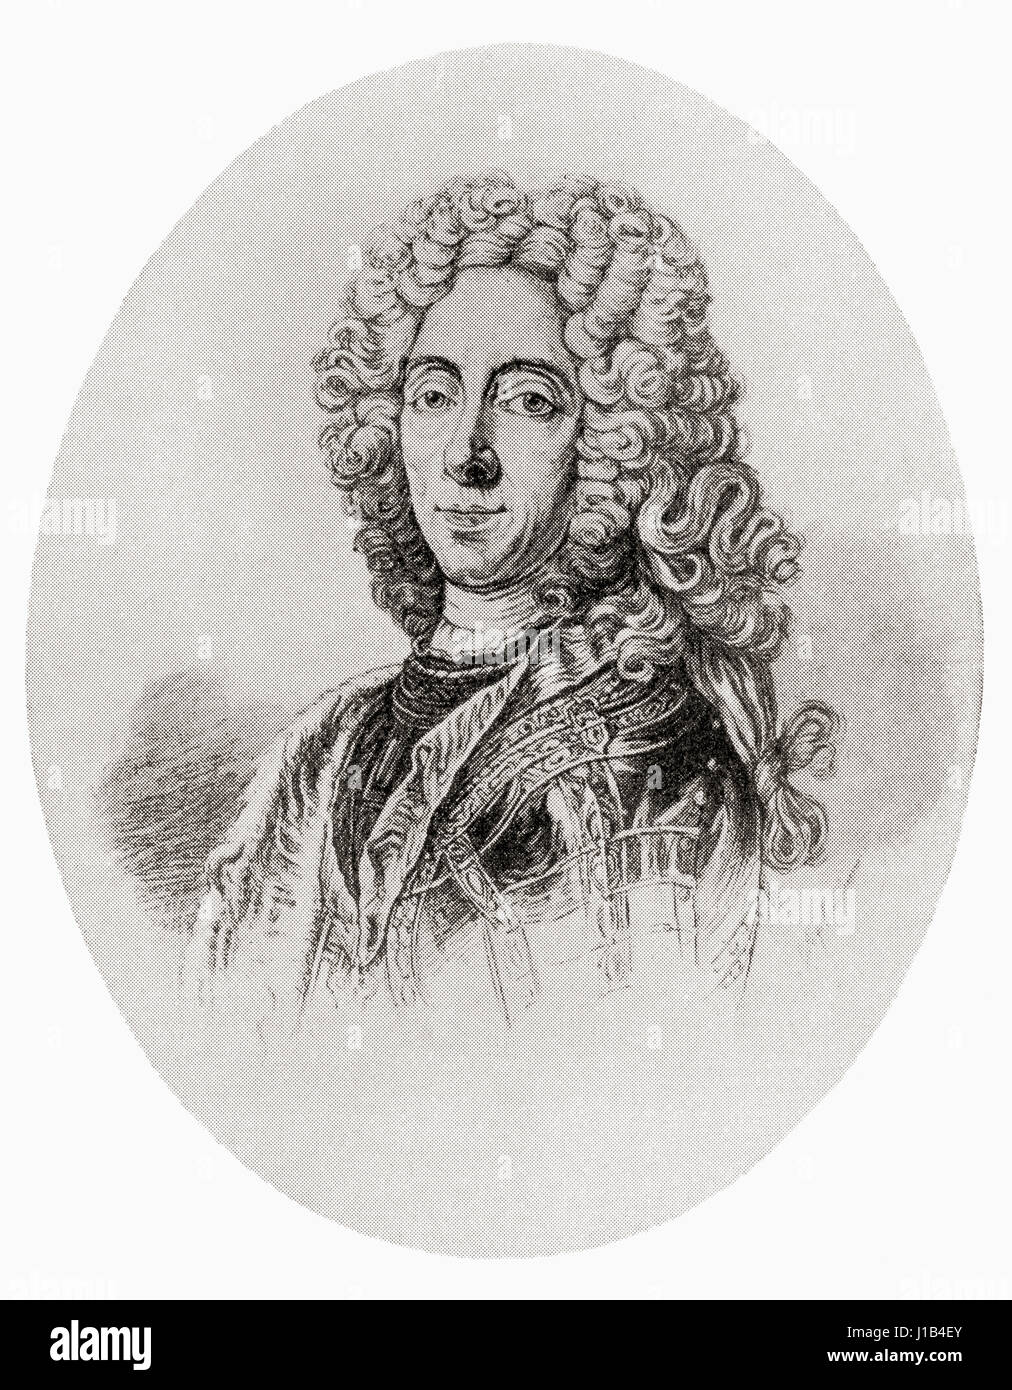 Prince Eugene of Savoy, 1663 – 1736.  General of the Imperial Army and statesman of the Holy Roman Empire and the Archduchy of Austria.  From Hutchinson's History of the Nations, published 1915 Stock Photo